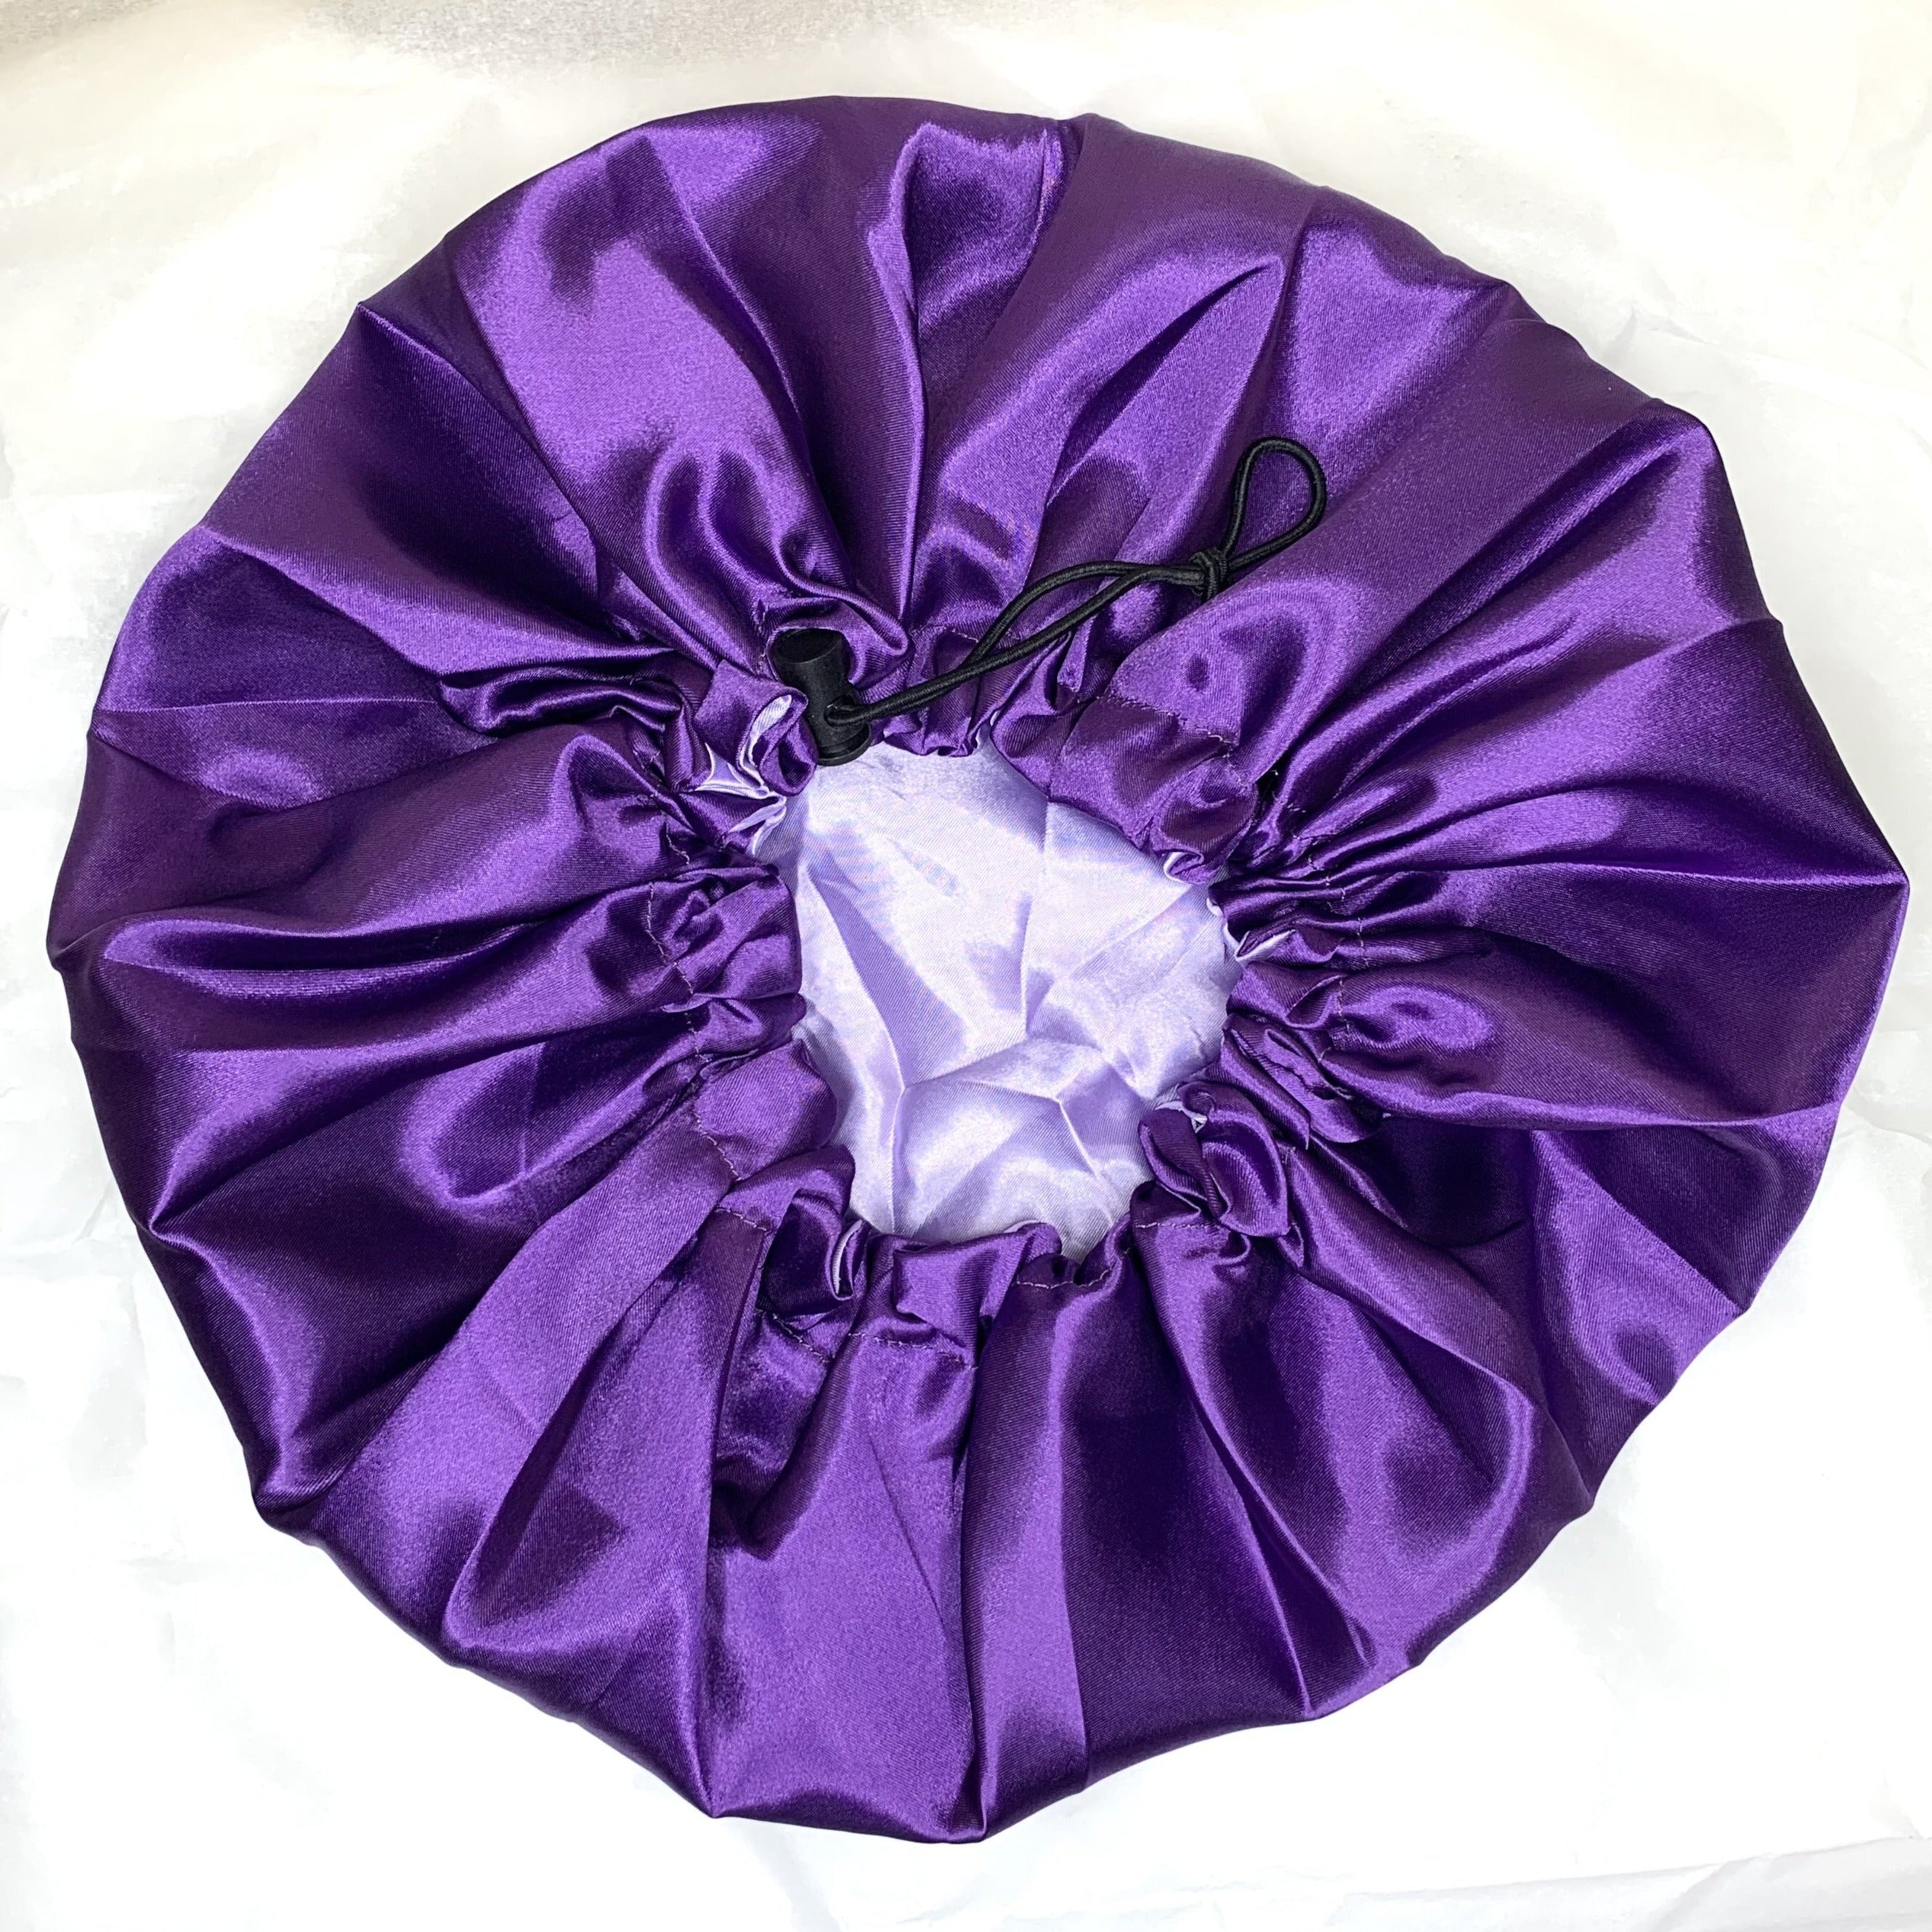 Reversible and adjustable satin bonnet - Purple and lilac